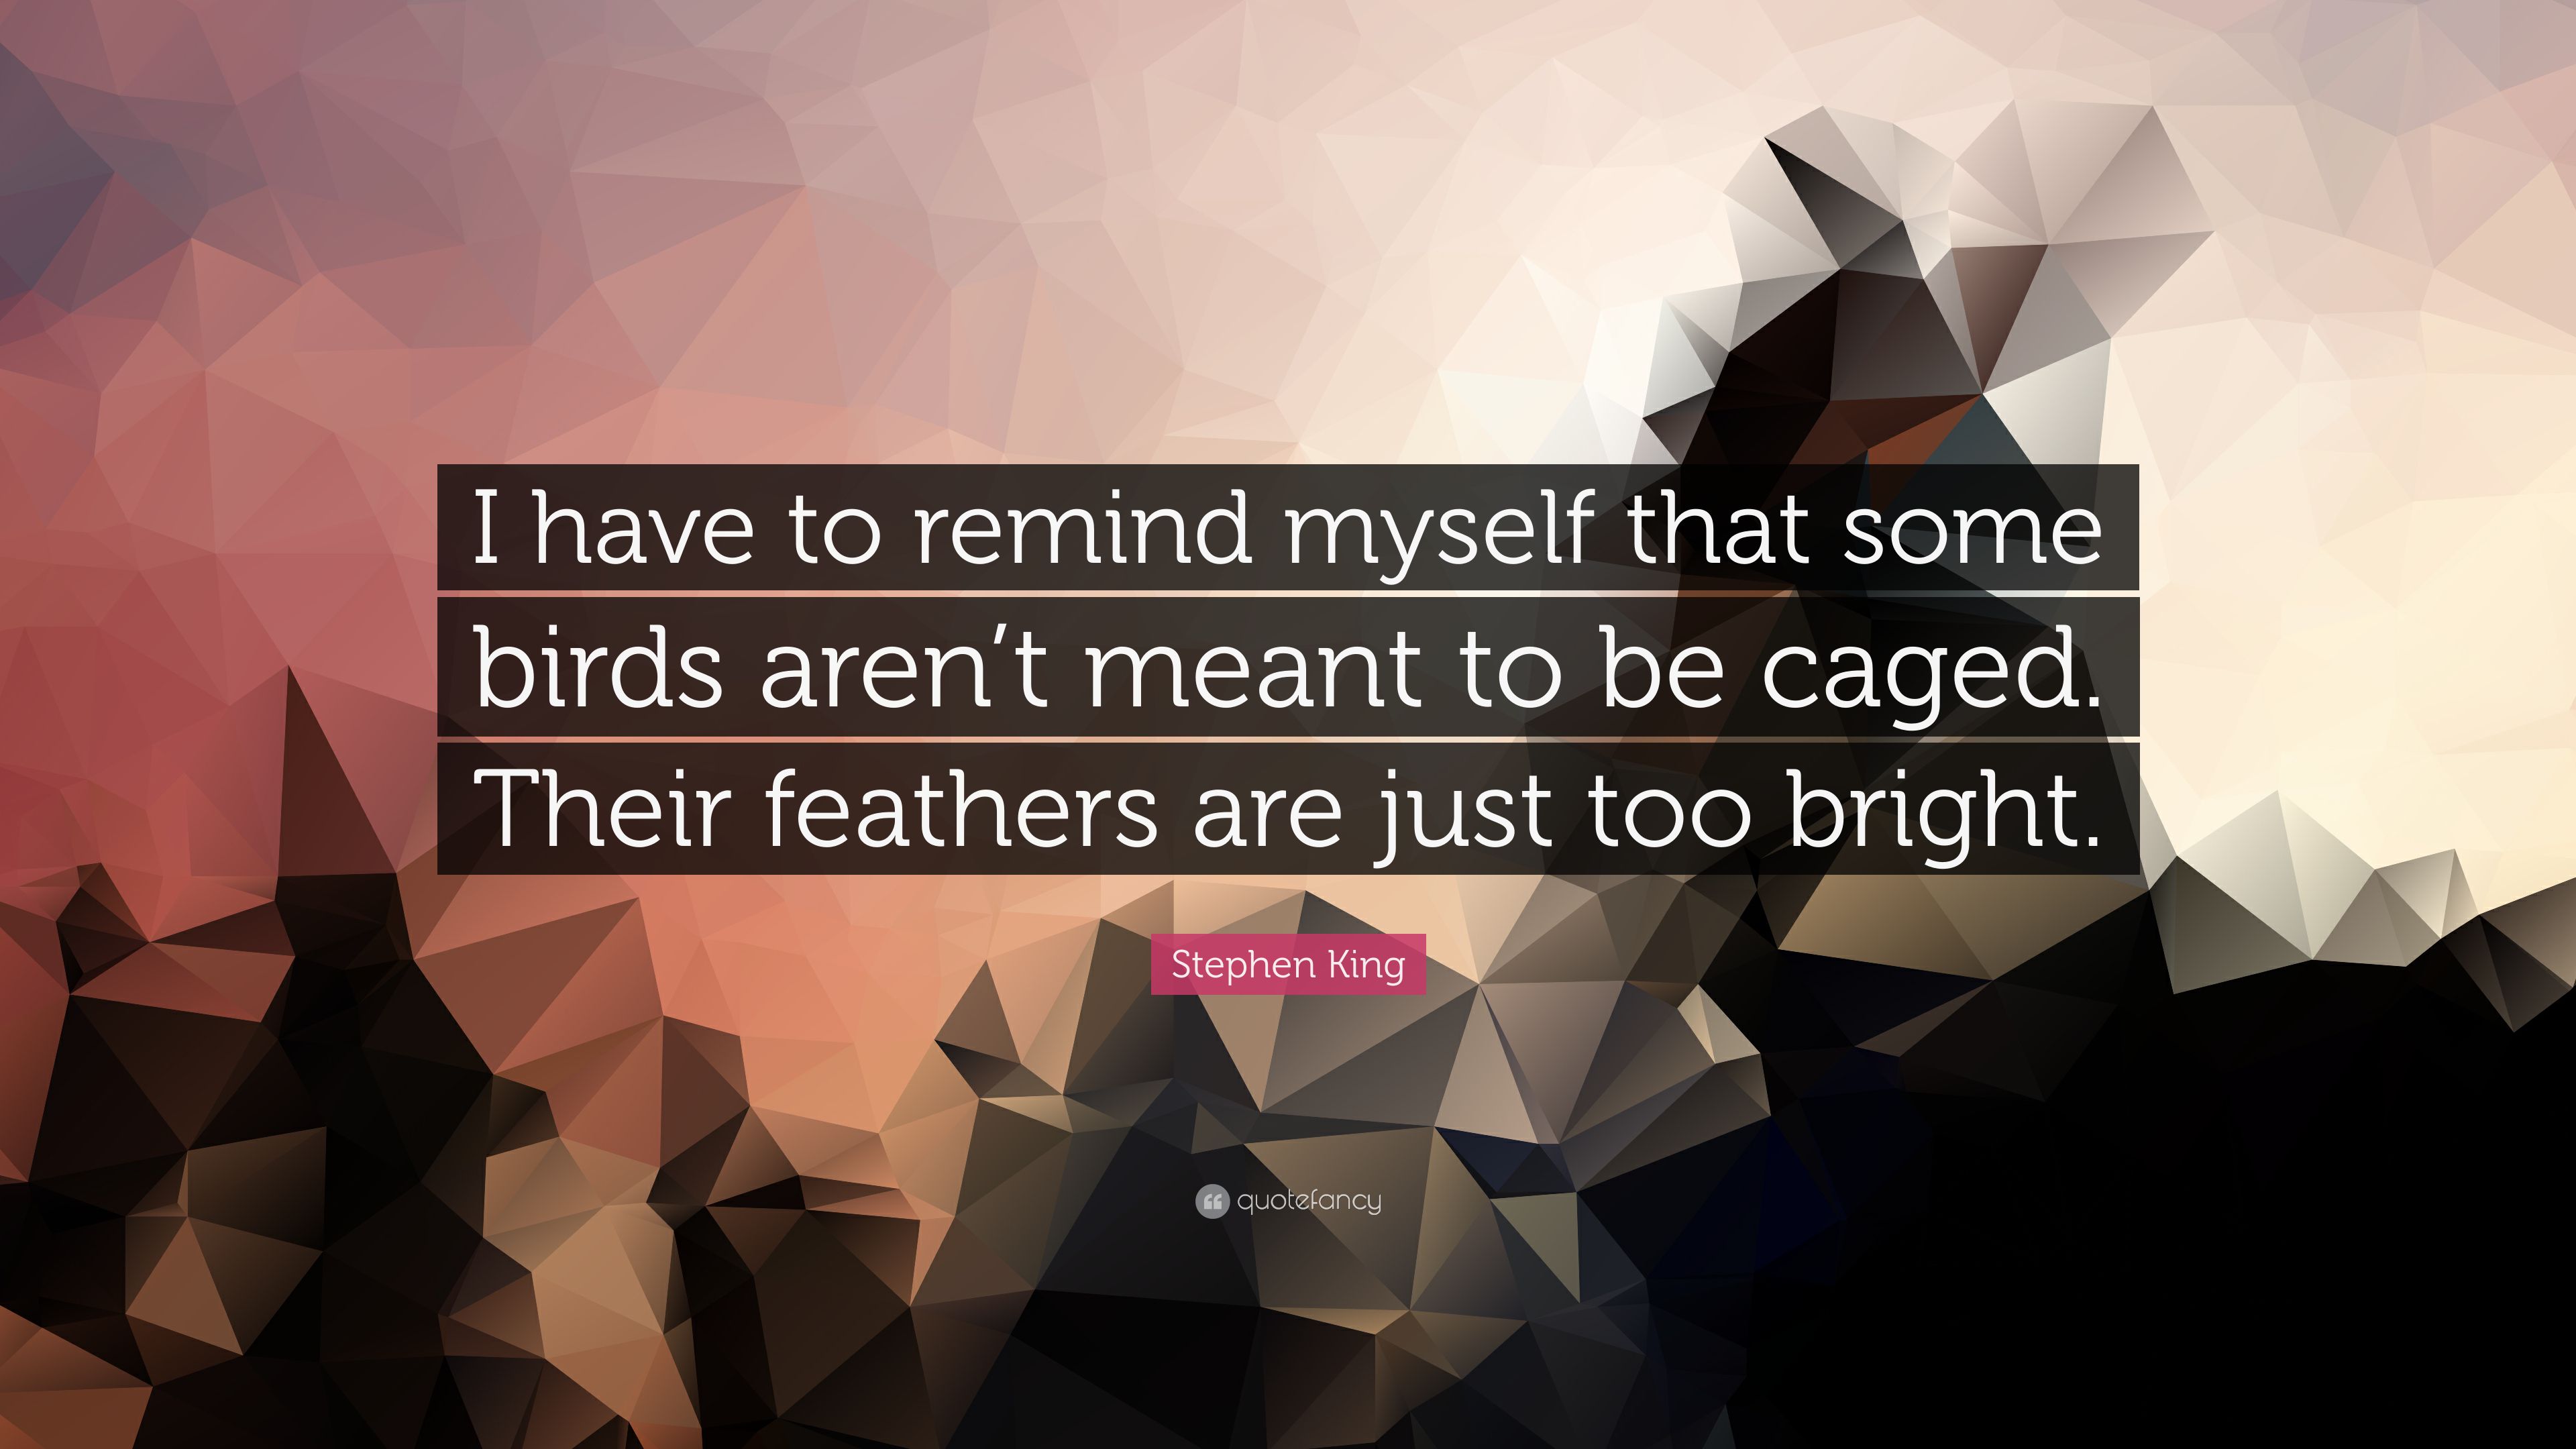 Stephen King Quote: “I have to remind myself that some birds aren't ...